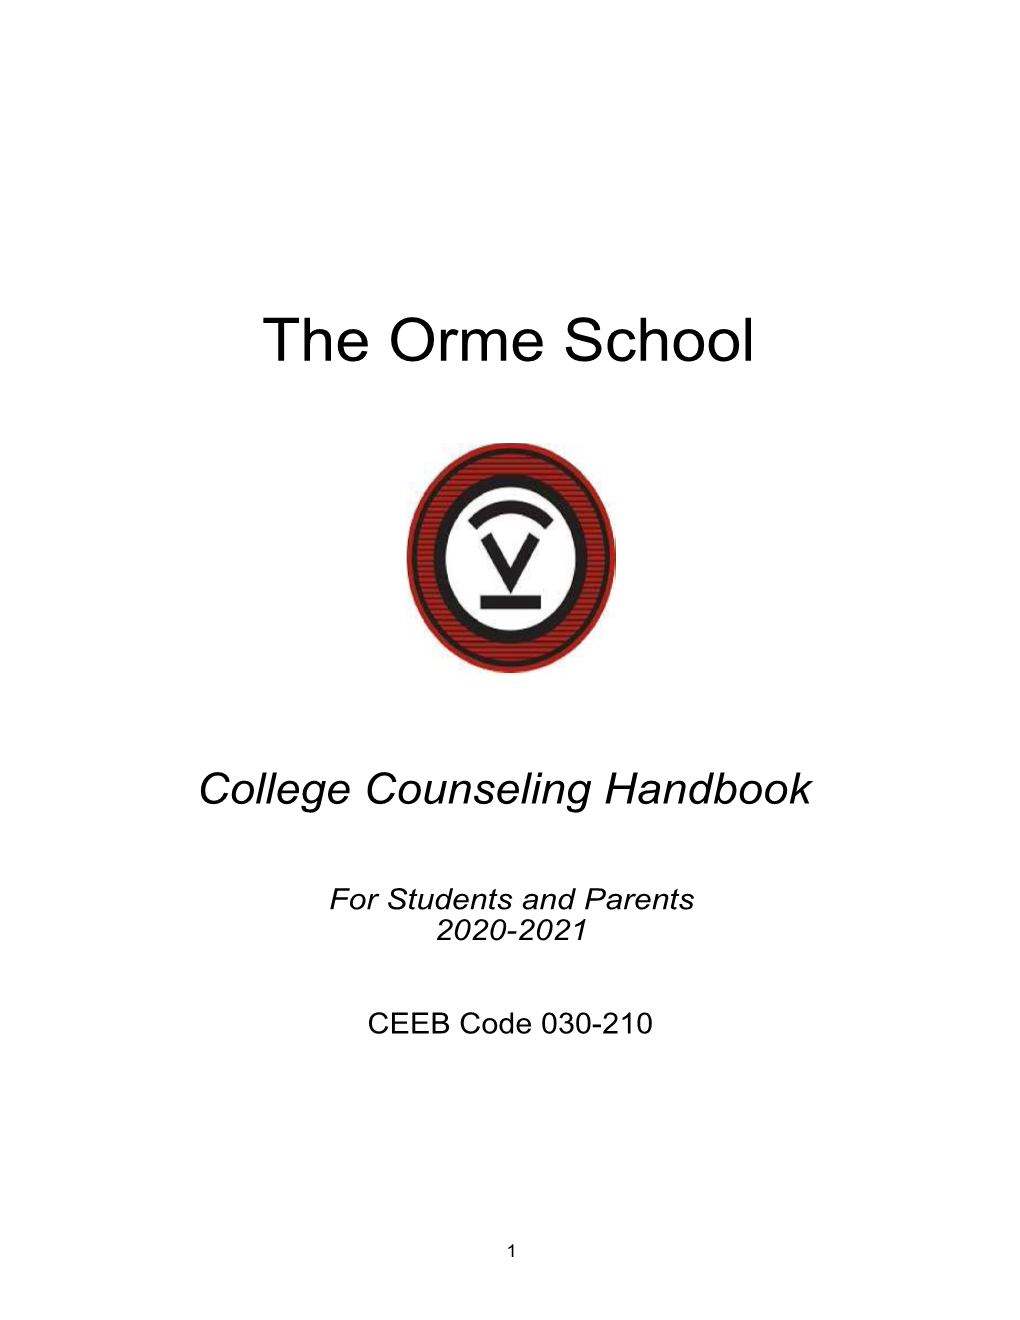 College Counseling Handbook